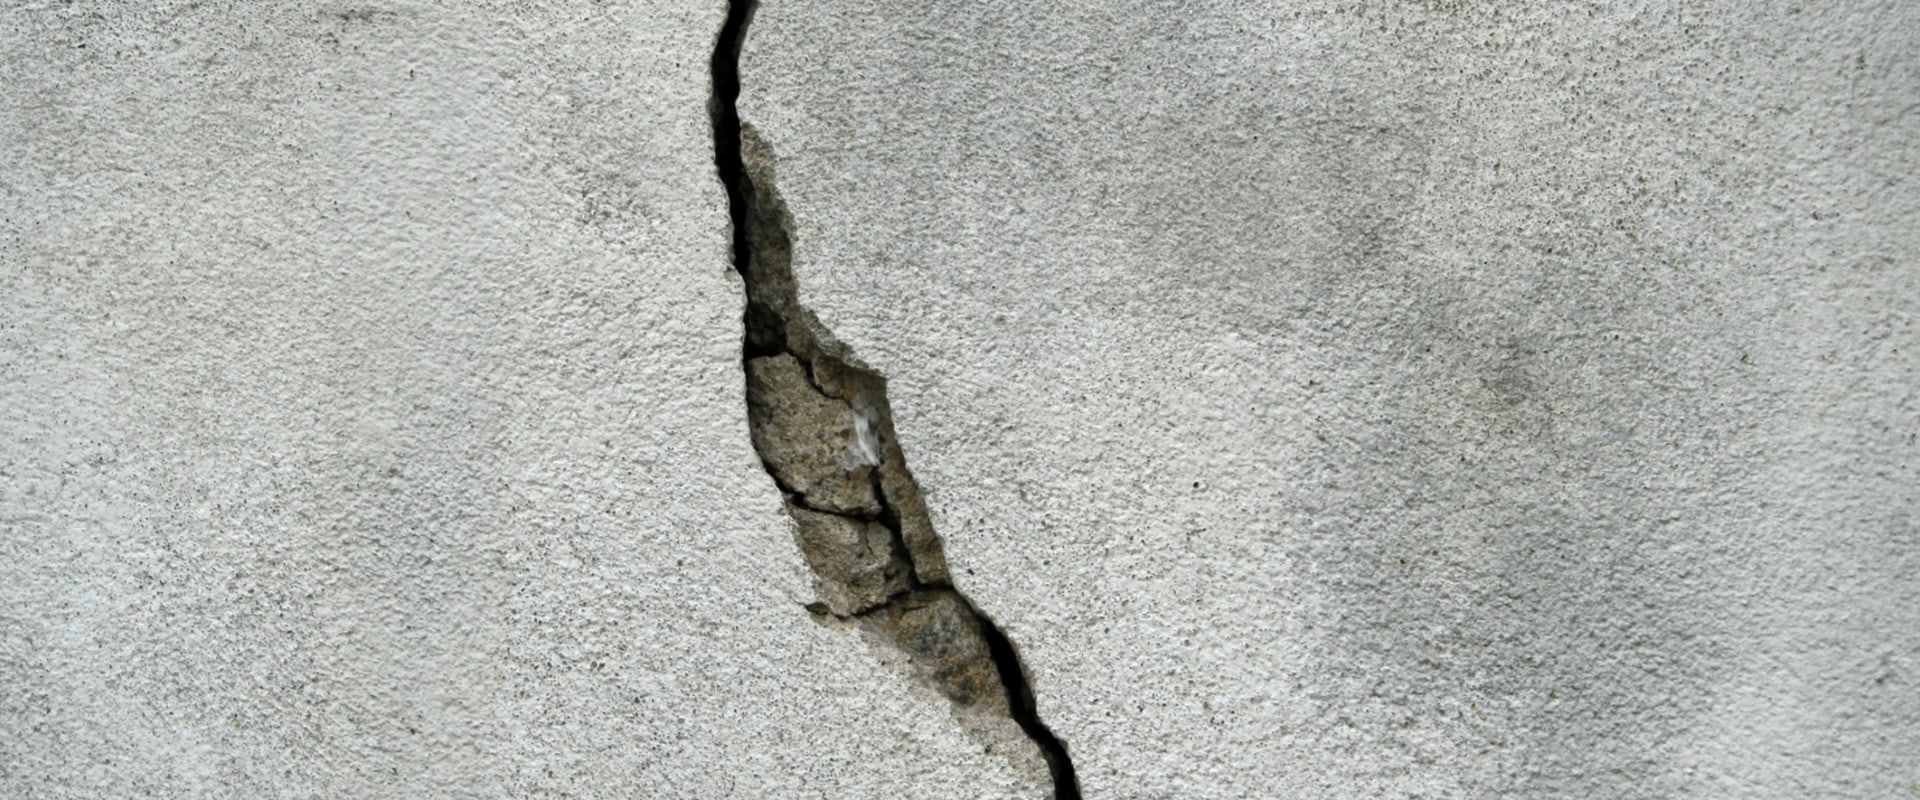 Can damaged concrete be repaired?